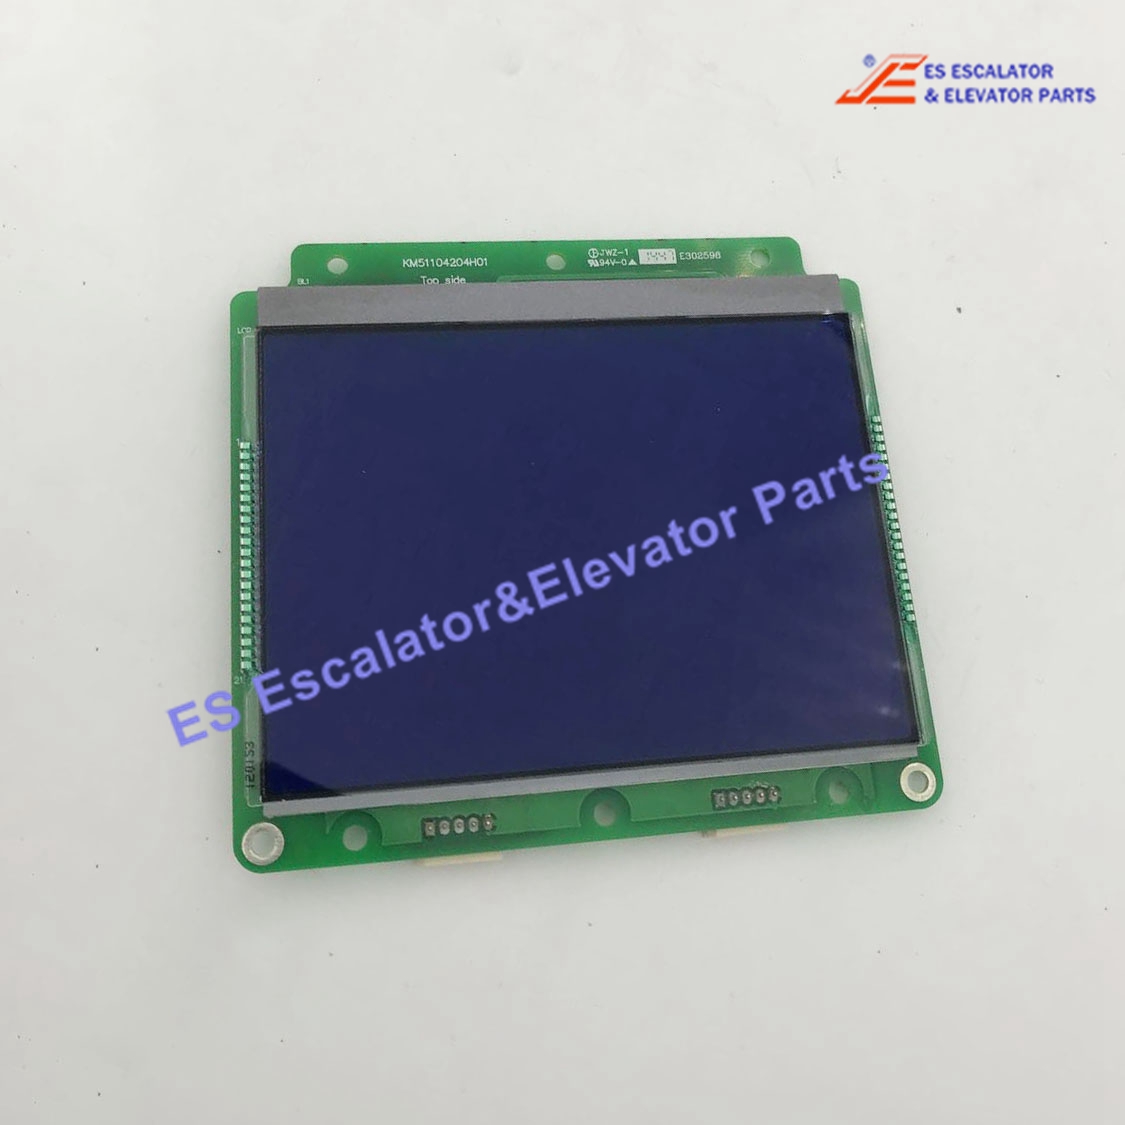 KM51104204H01 car indicator LCD blue Use For KONE